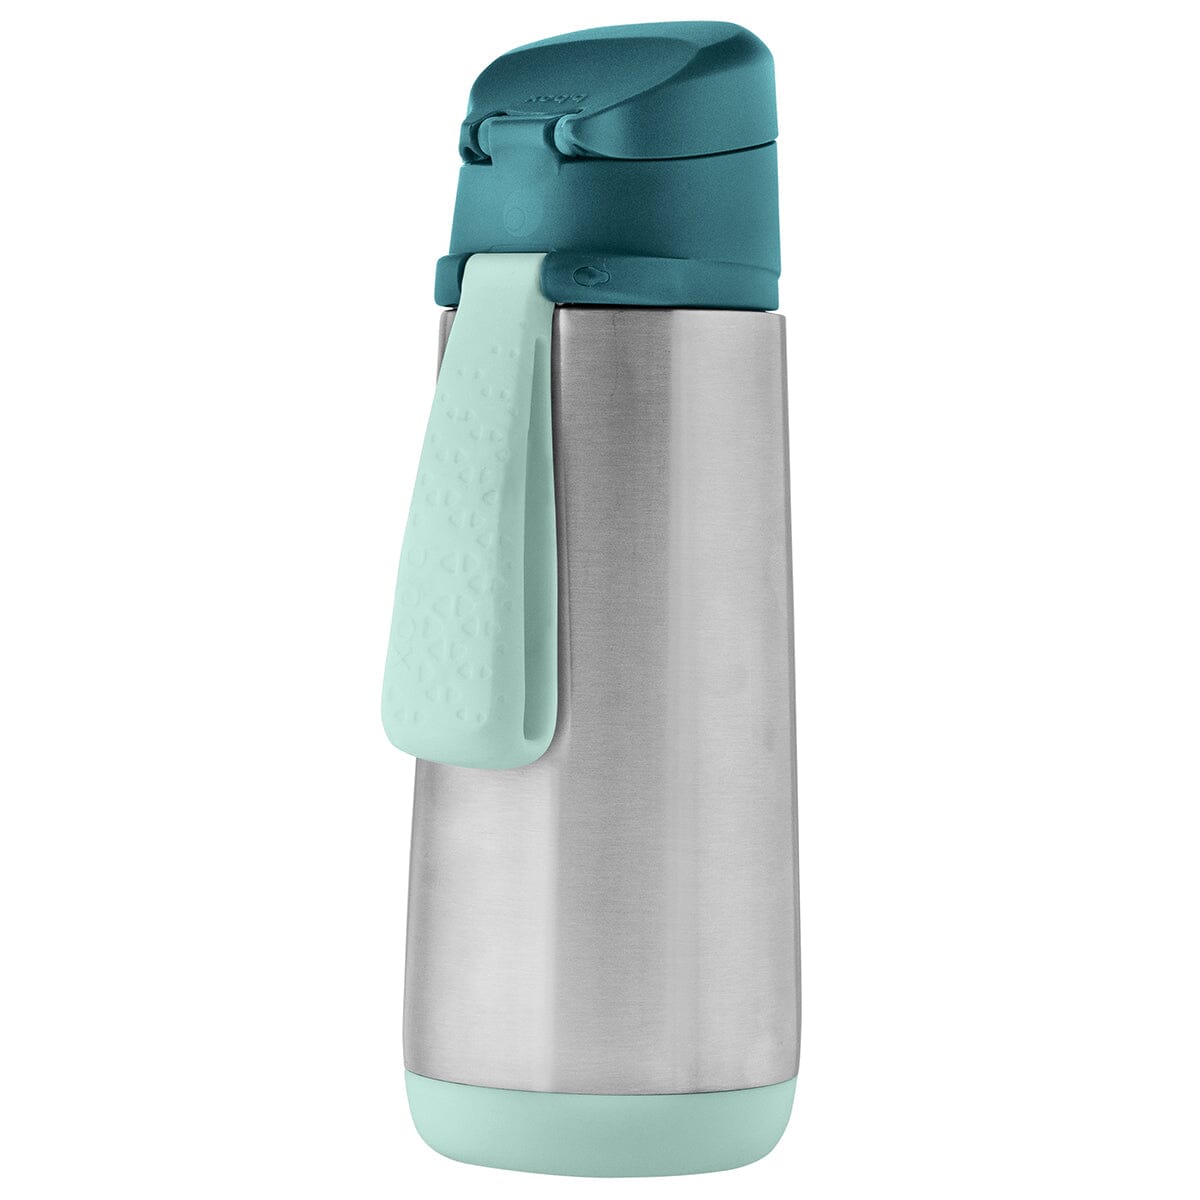 B.BOX - Insulated Drink Bottle - Sport Spout - 500ml - Emerald Forest Meal Time B.BOX